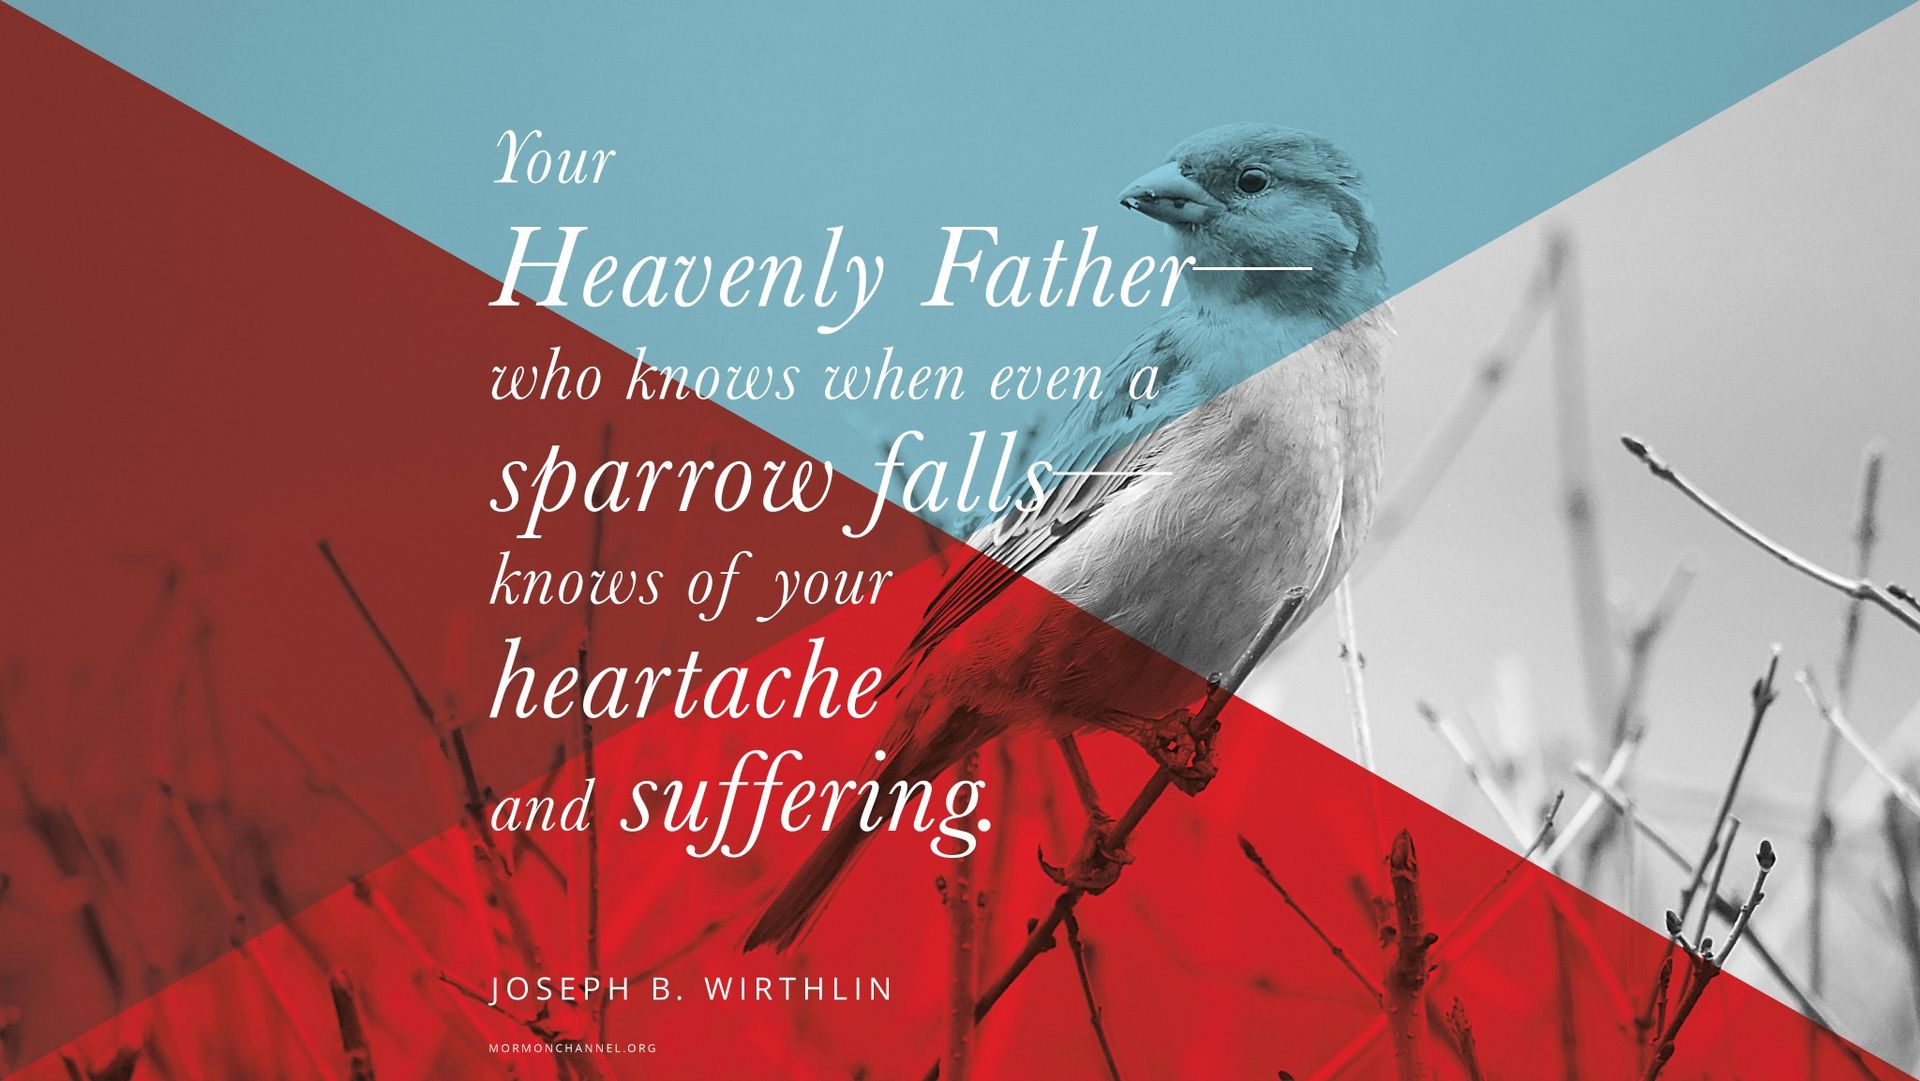 “Your Heavenly Father—who knows when even a sparrow falls—knows of your heartache and suffering.”—Elder Joseph B. Wirthlin, “Finding a Safe Harbor” © undefined ipCode 1.